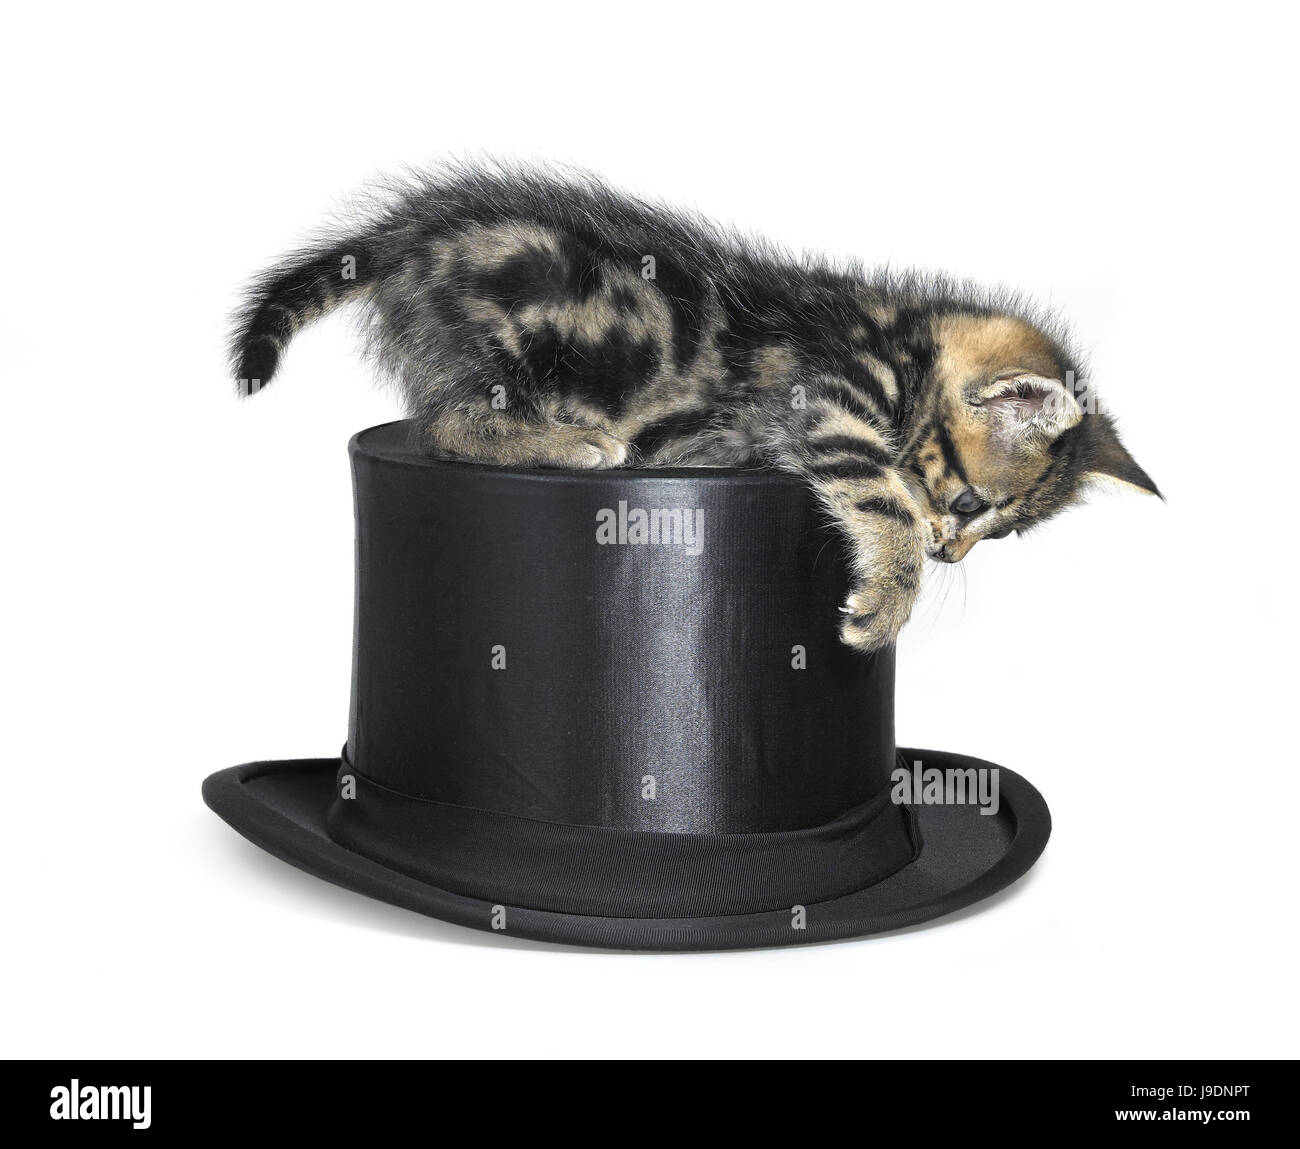 Kitten playing sur top hat Banque D'Images